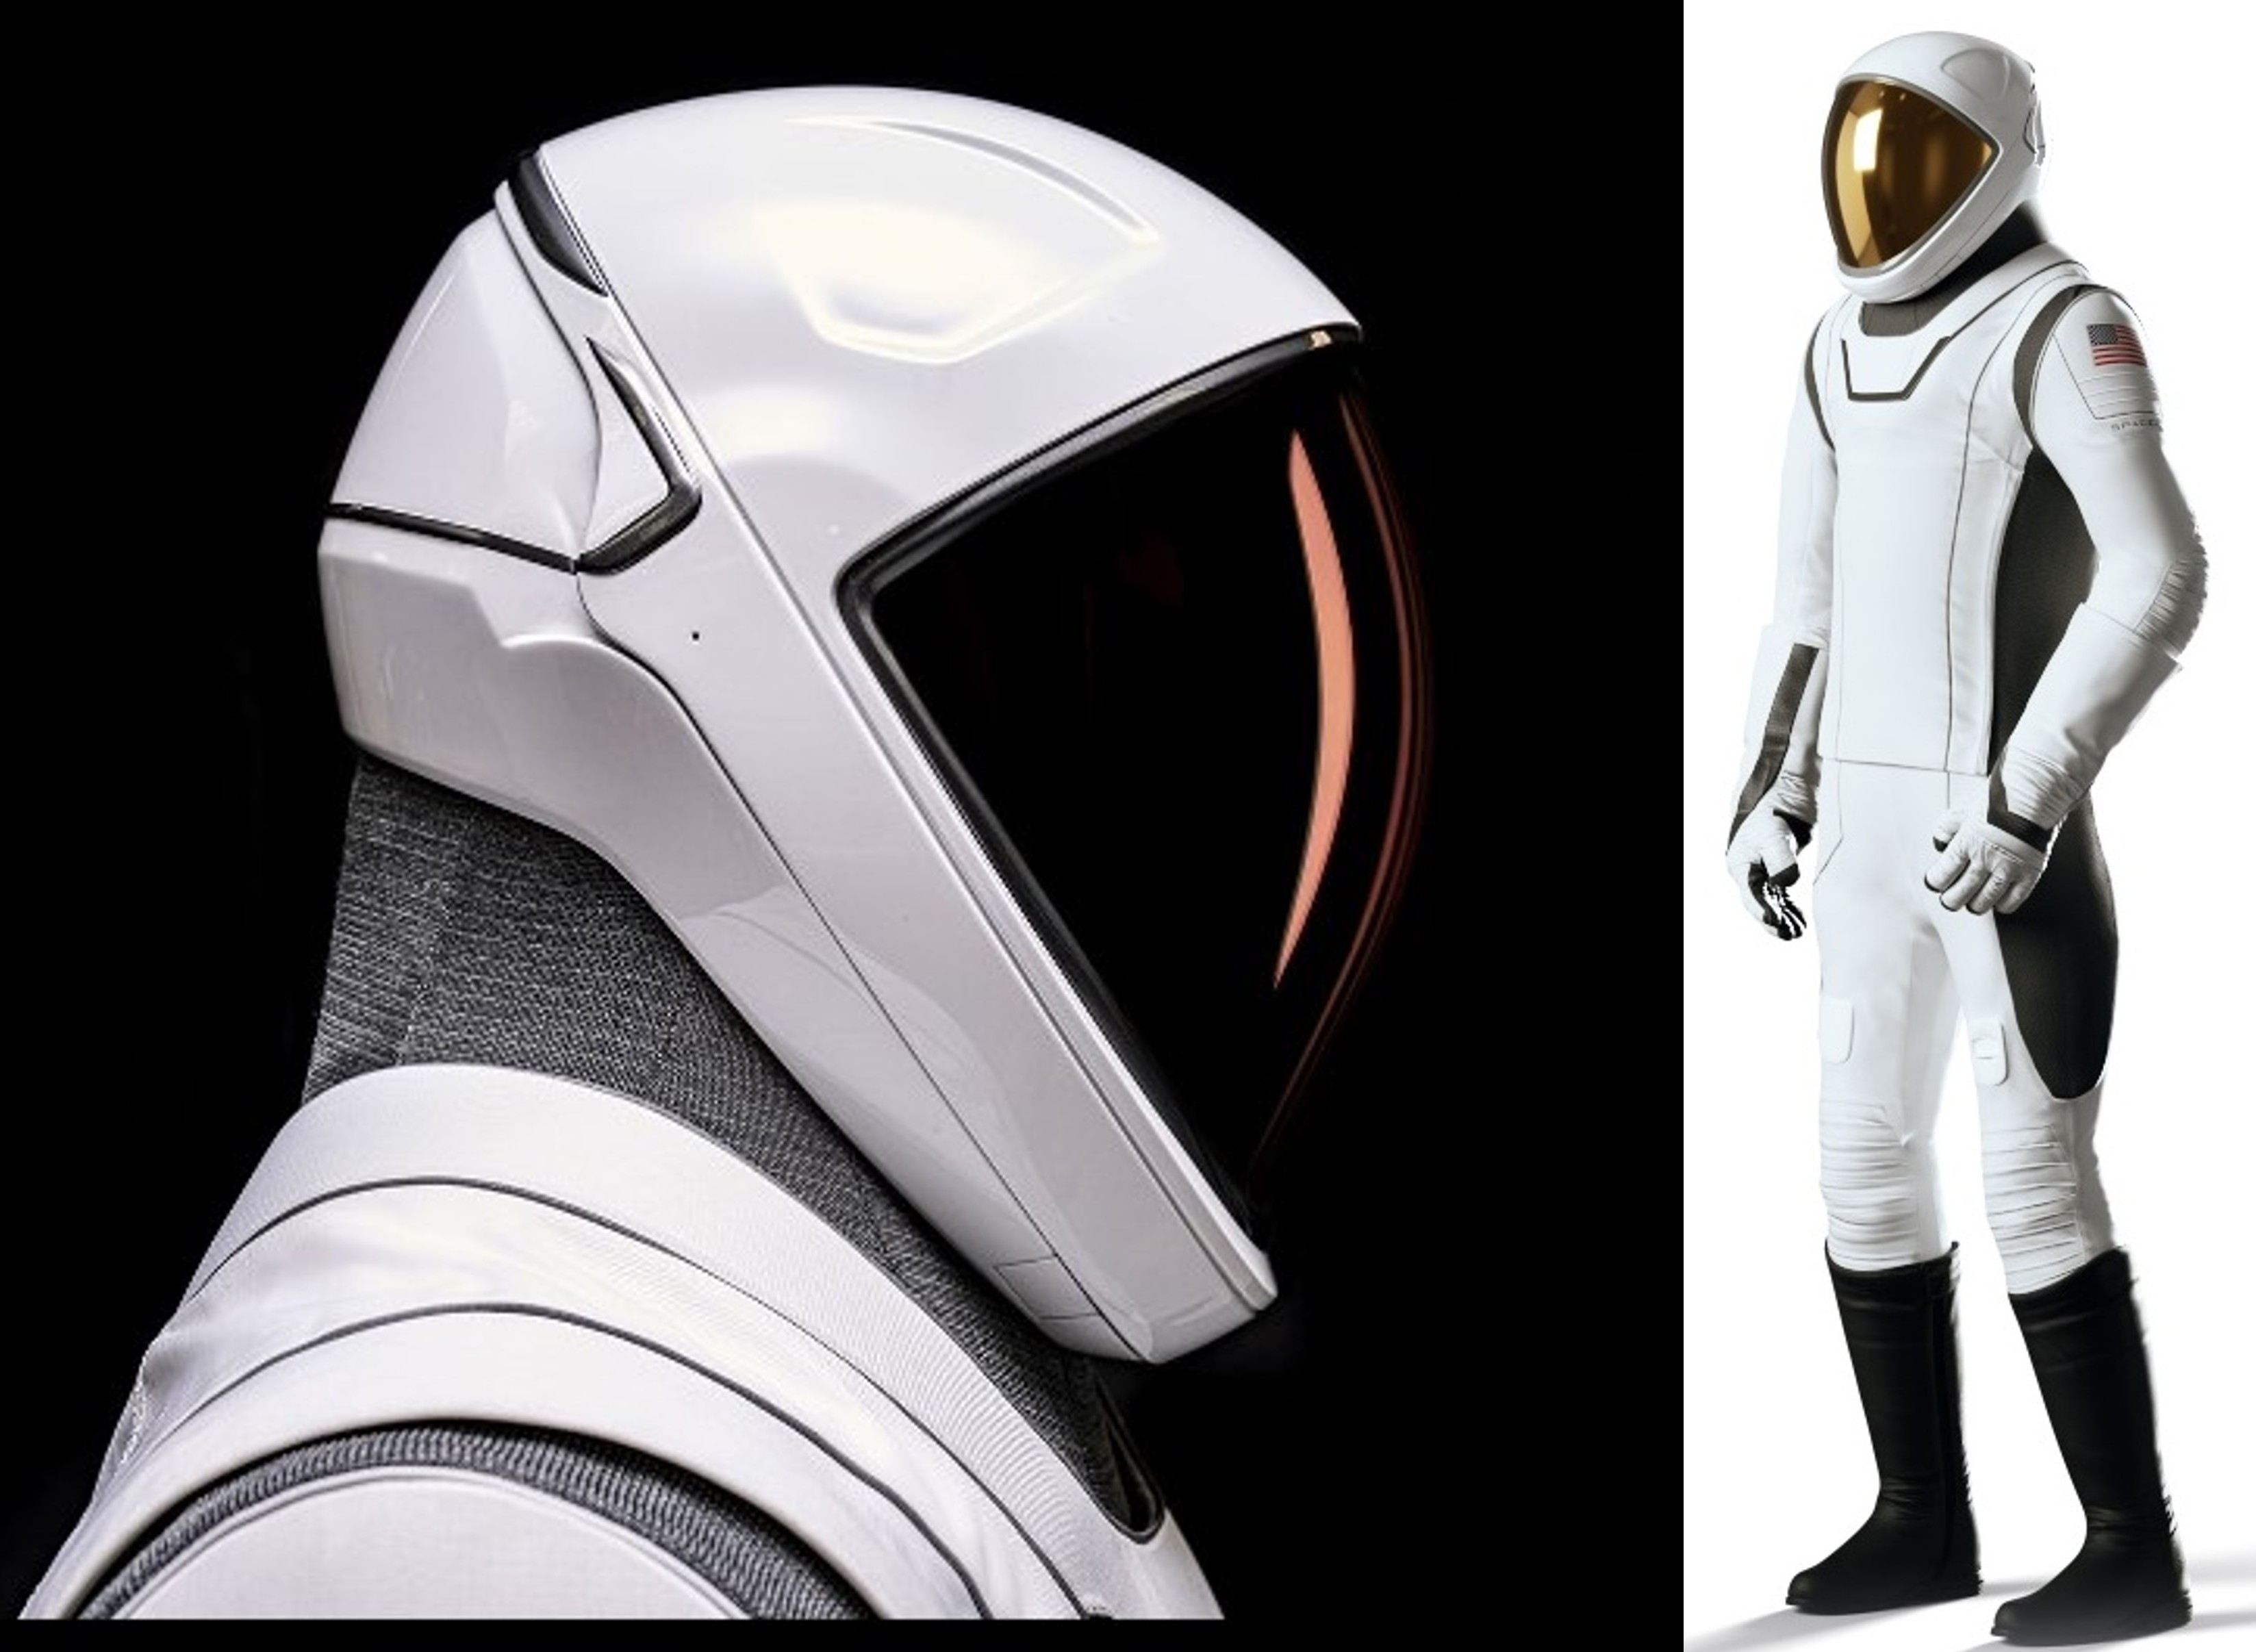 on the left, a profile bust view of a white spacesuite facing right. On the right, in a slimmer section of the image, that full spacesuit, facing left. The white is accented with dark grey sections, black boots, and a copper gold visor.